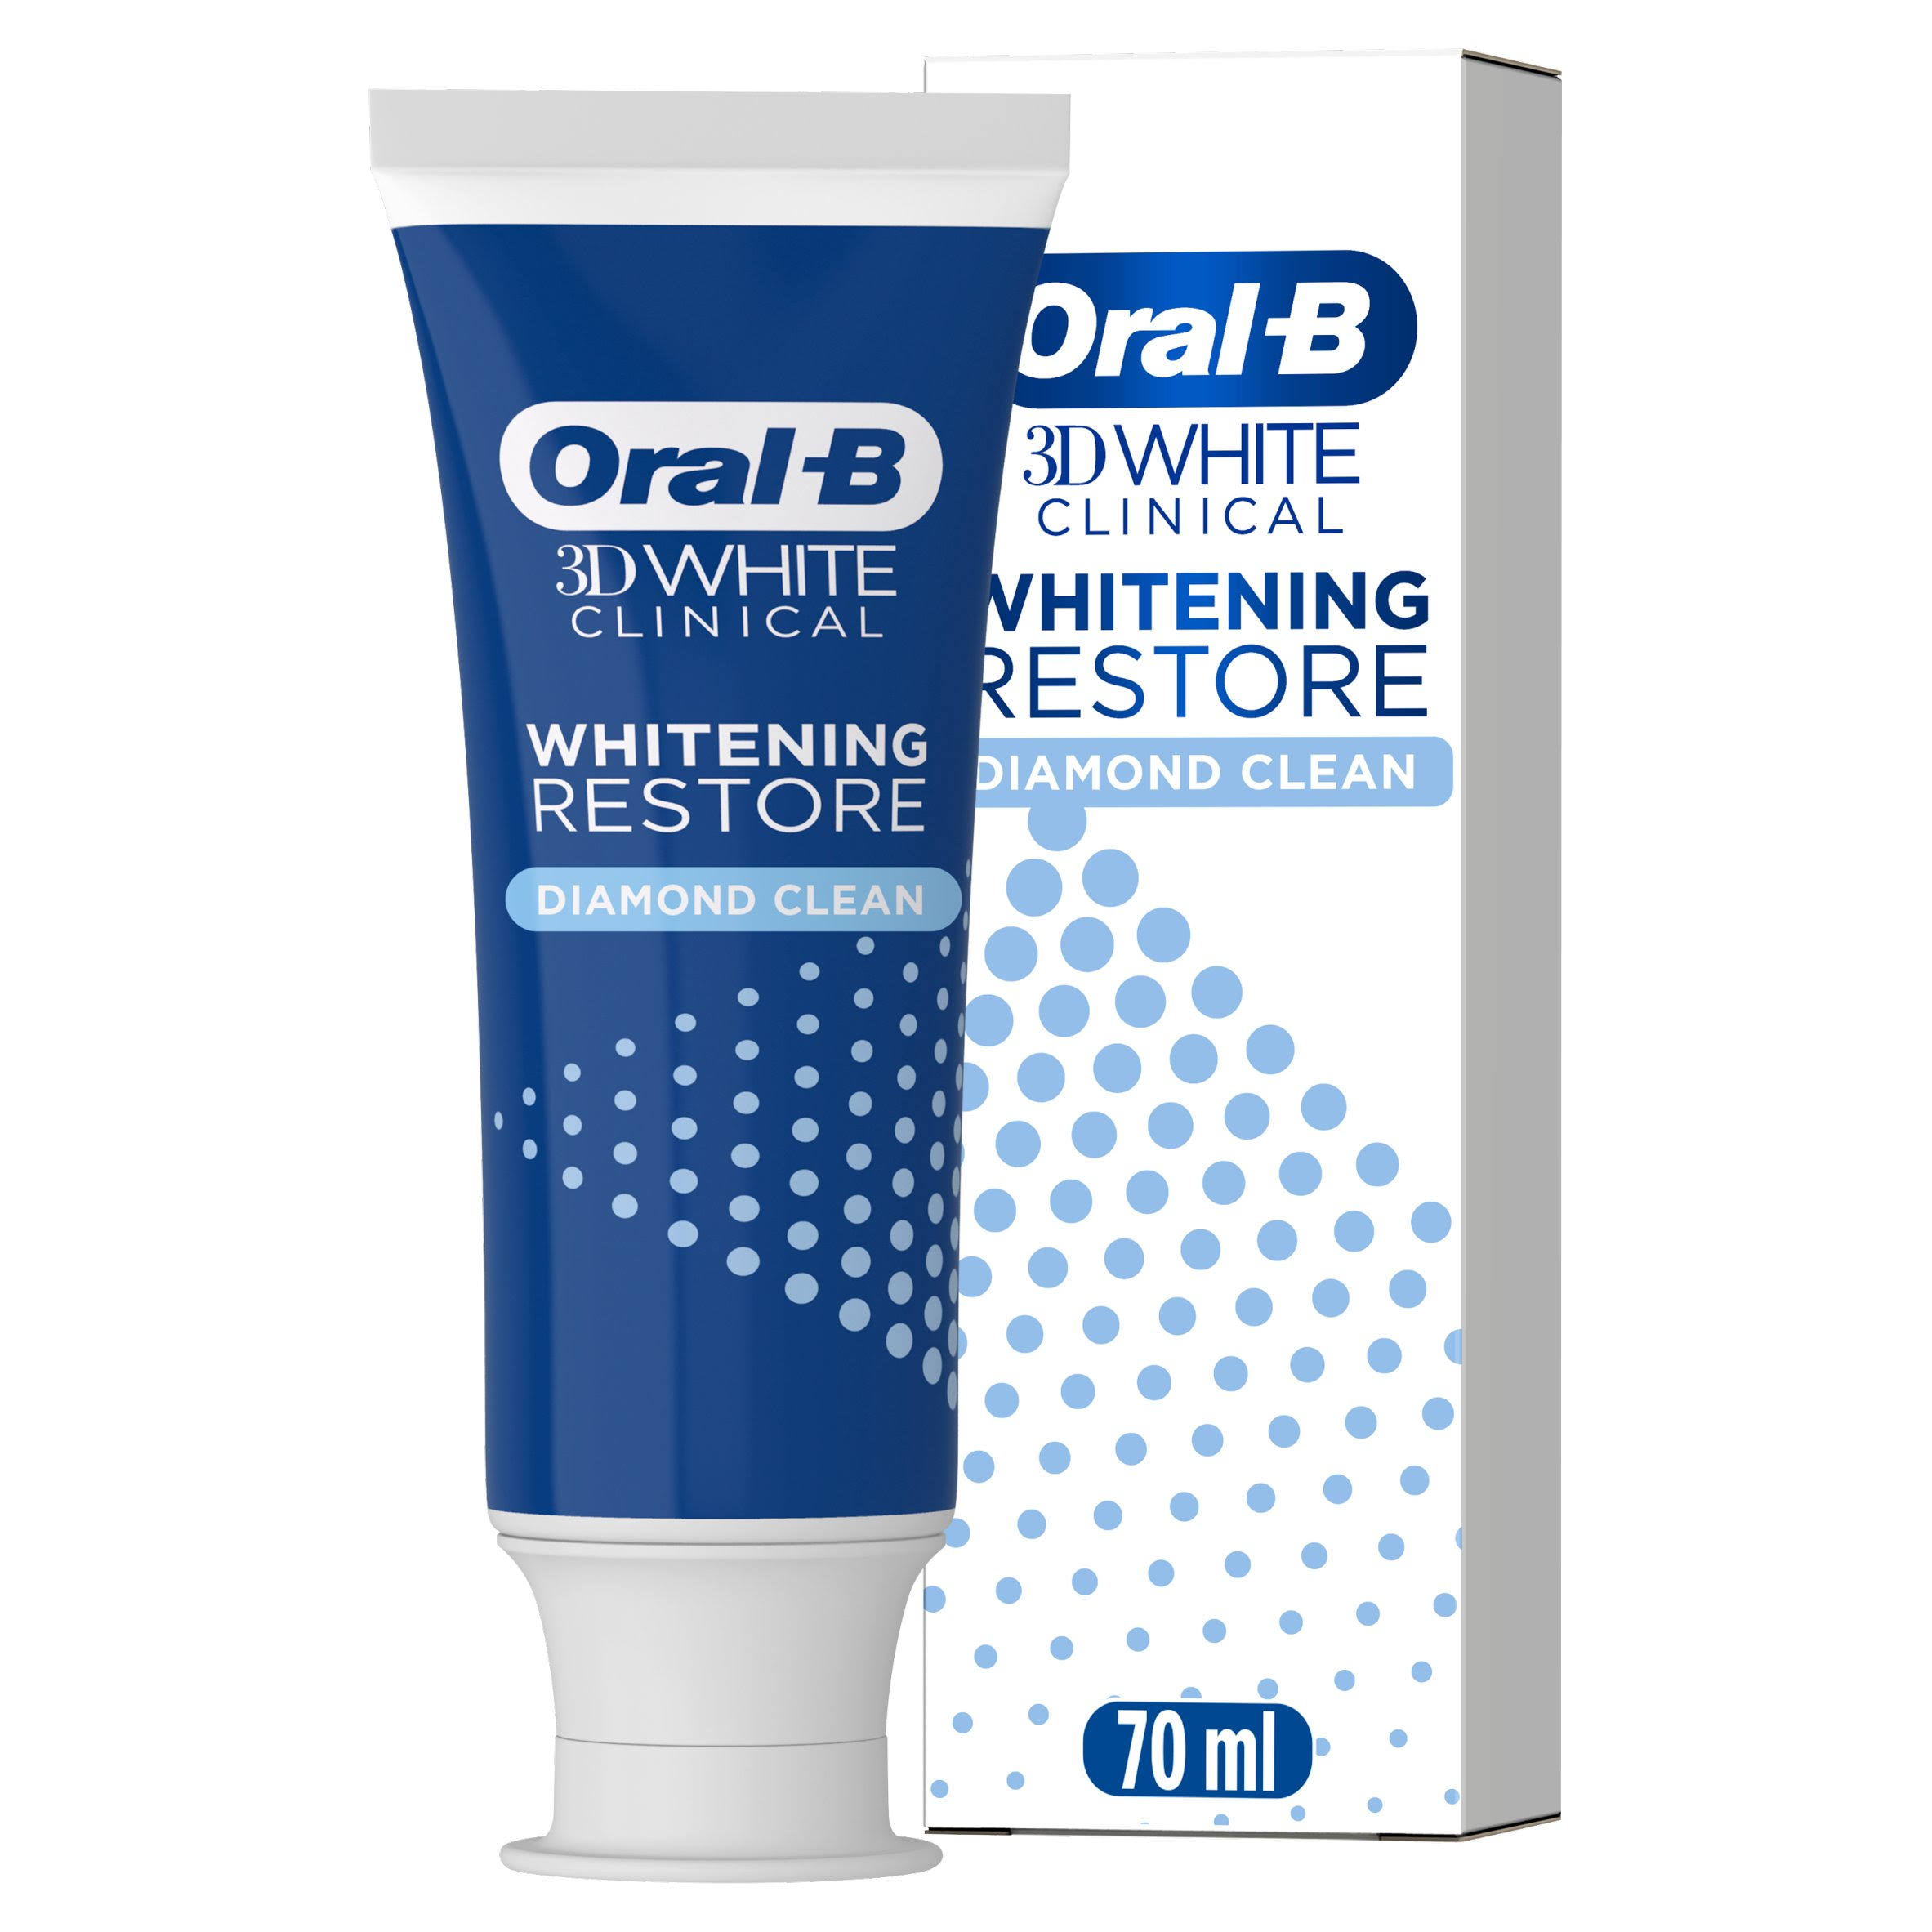 Oral B Clinical Whitening Restore Diamond Clean Toothpaste